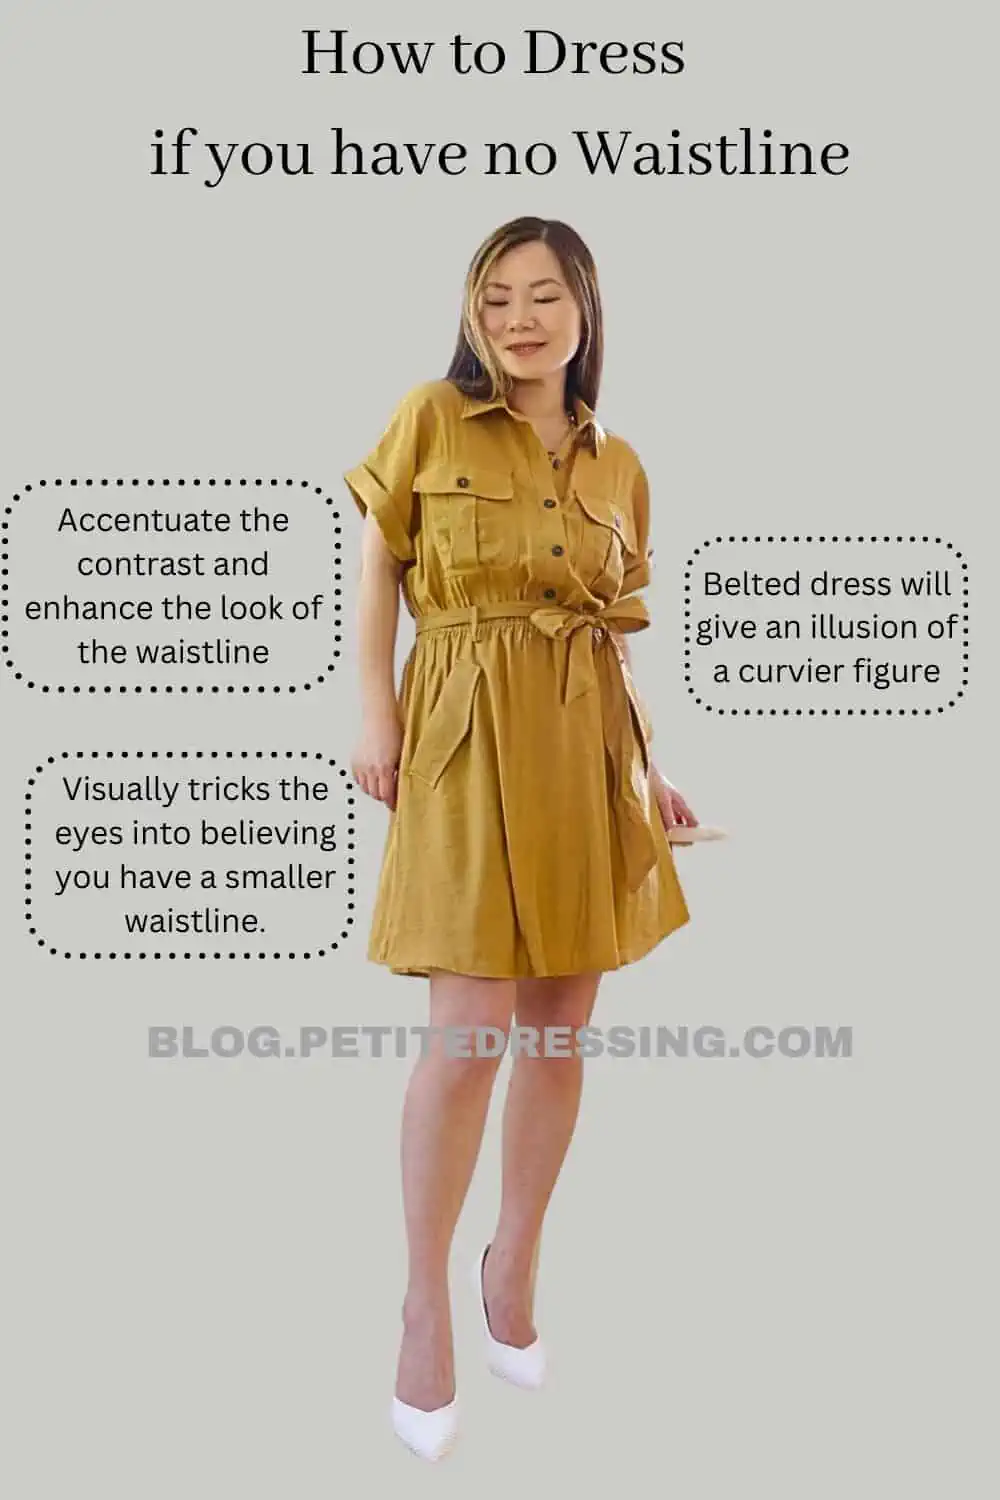 Dress styles - the complete illustrated fashion guide to dress styles